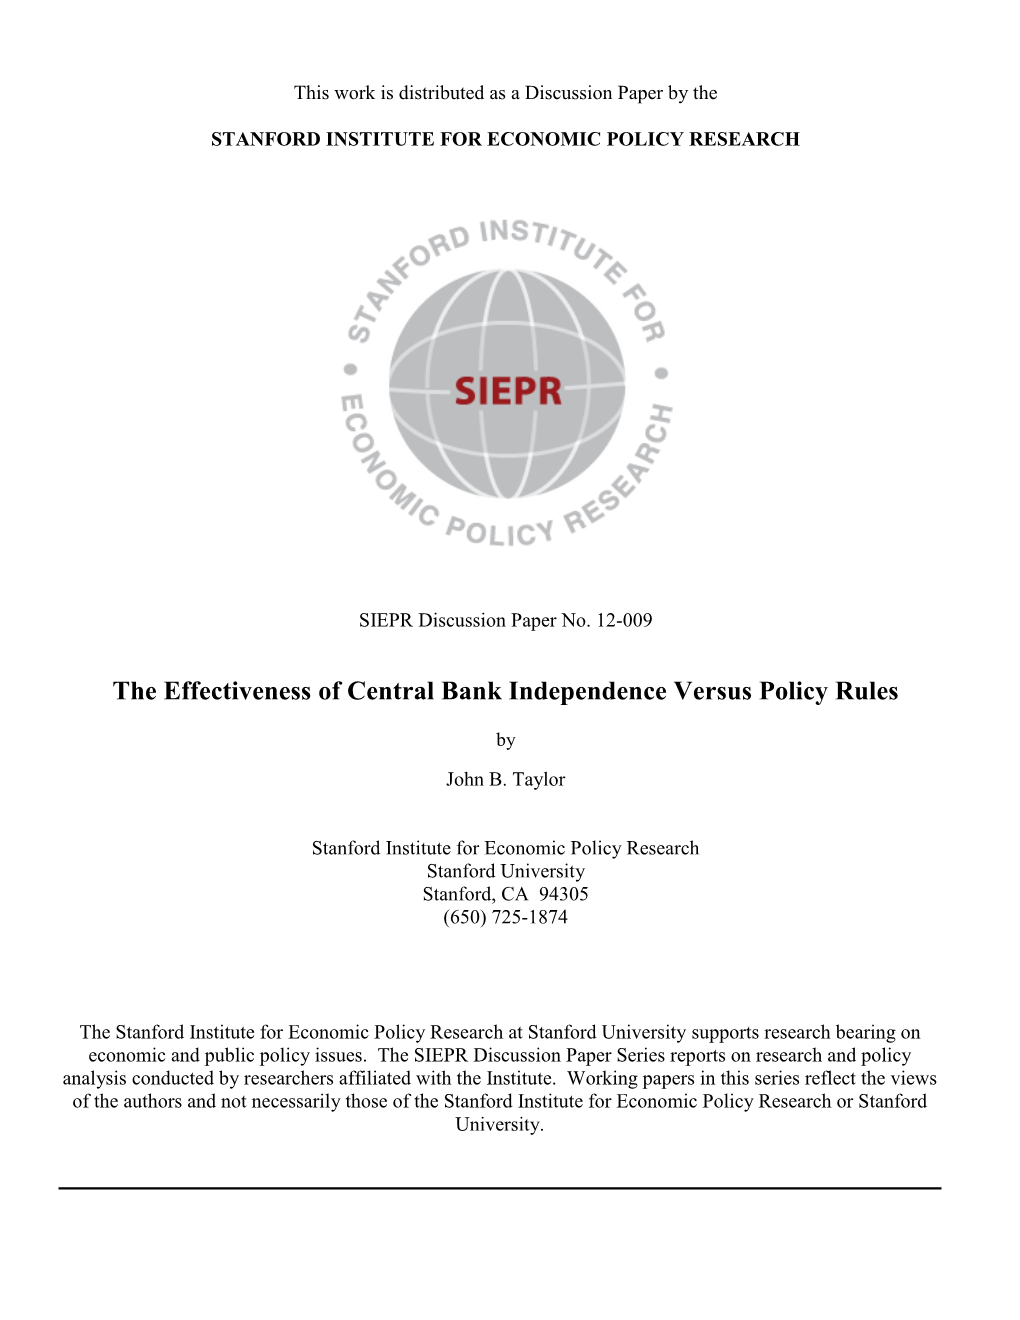 The Effectiveness of Central Bank Independence Versus Policy Rules